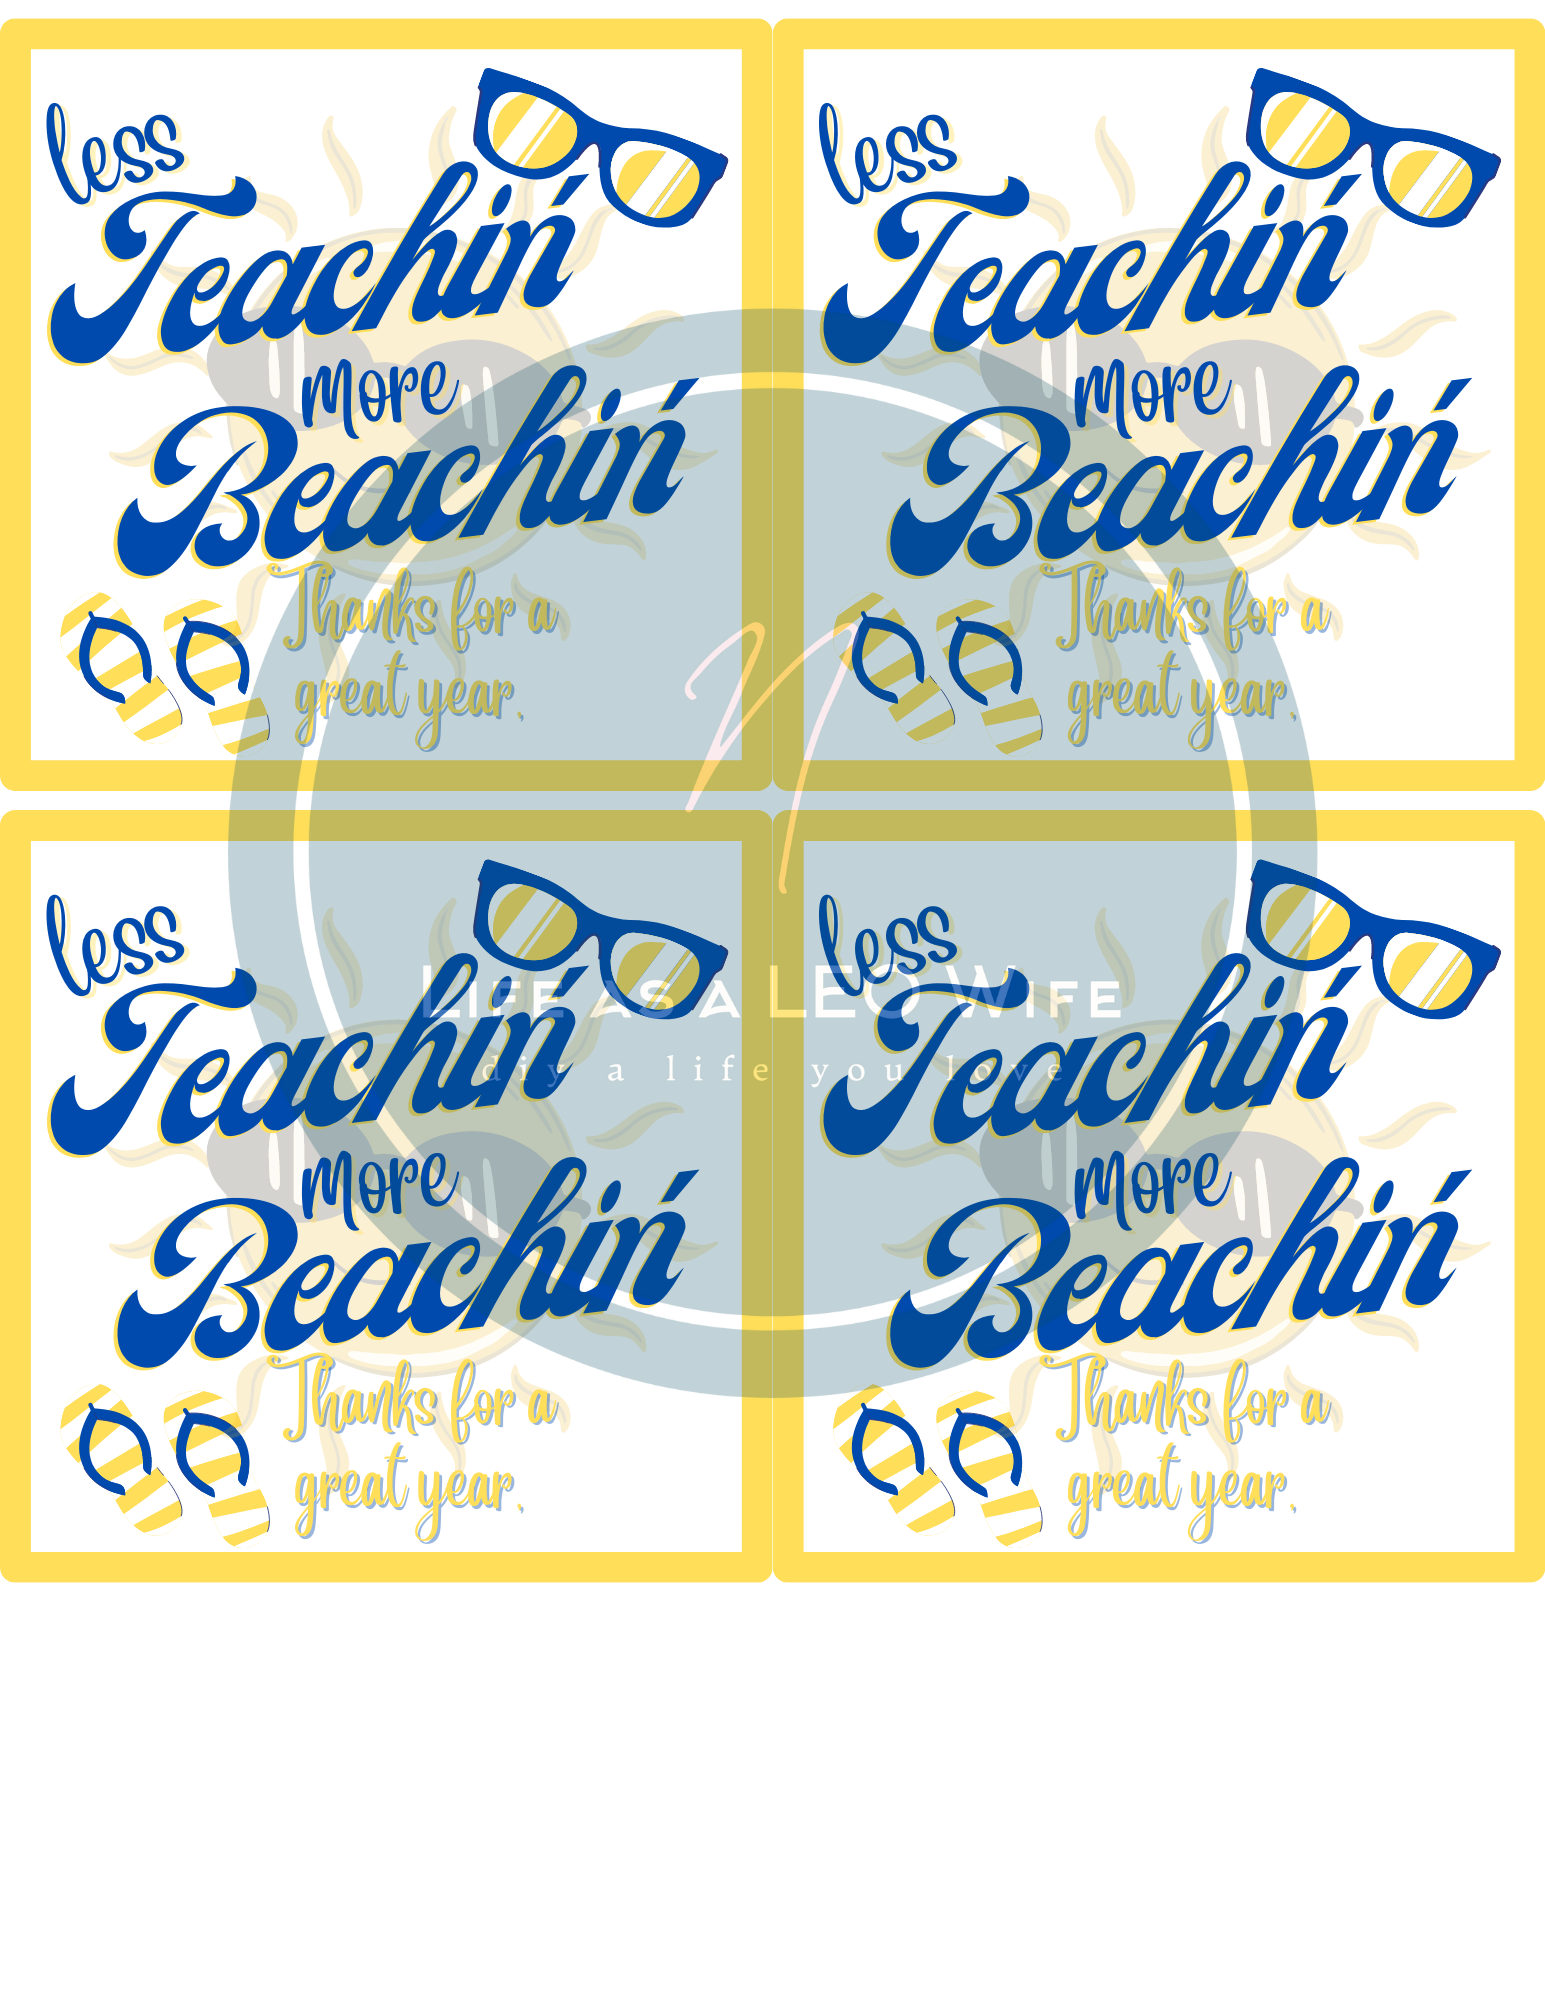 End of the Year teacher gift tags: less teachin' more beachin' gift tags in blue and gold.